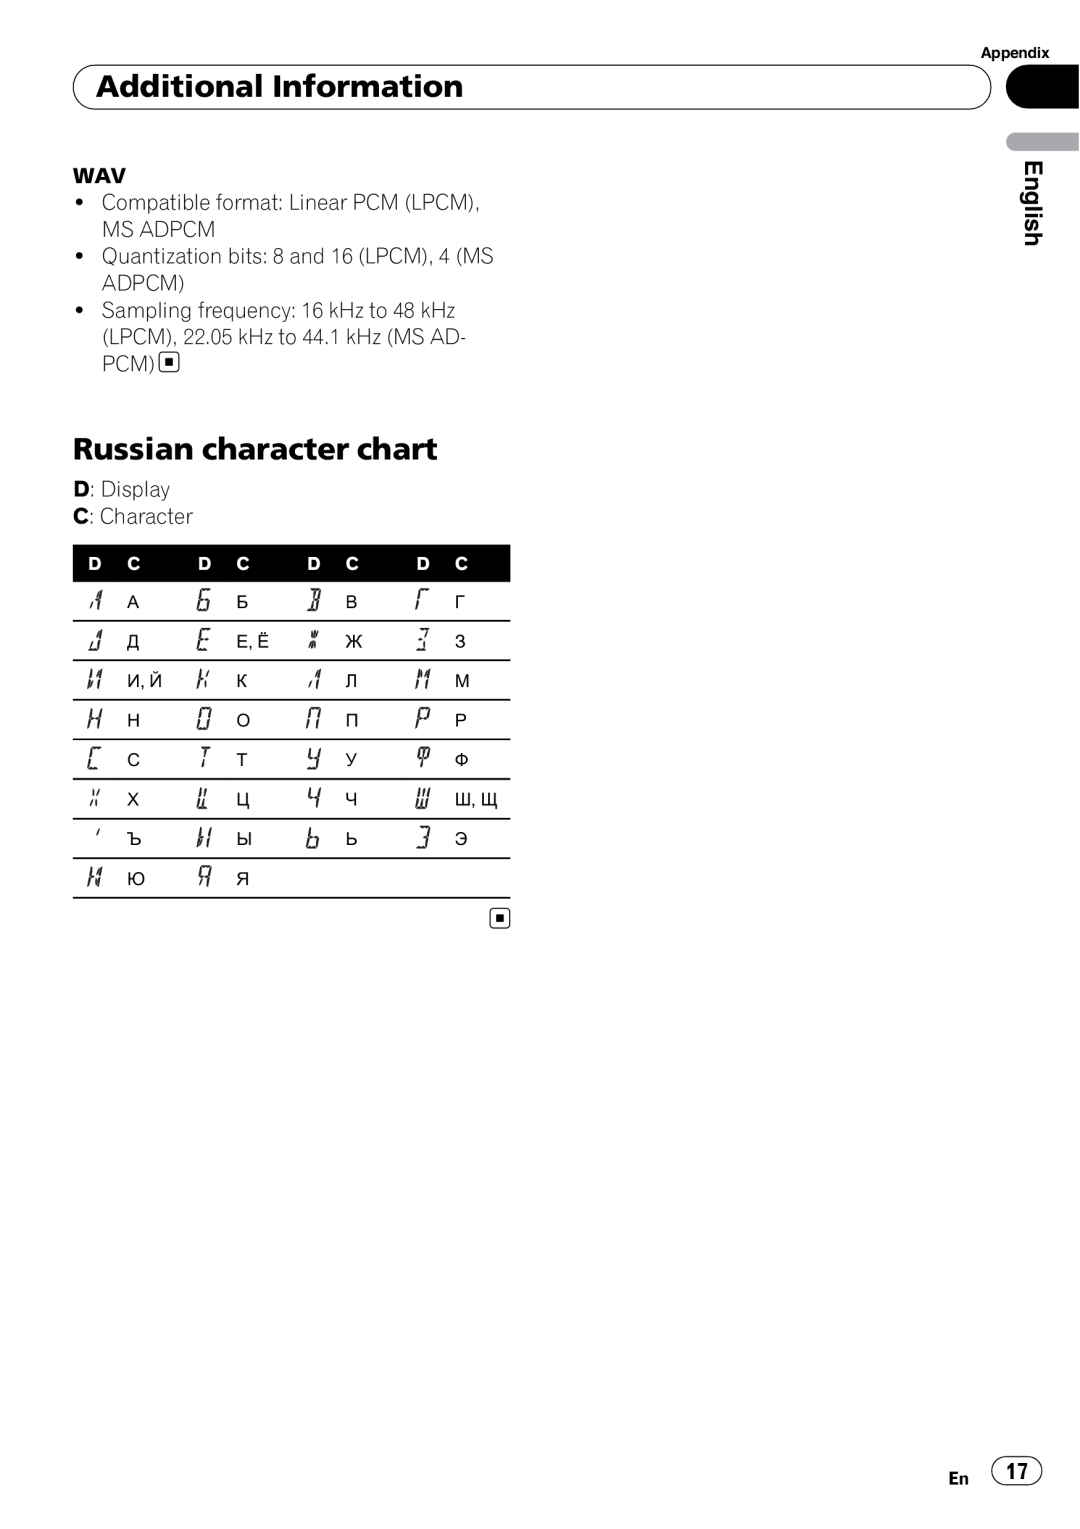 Pioneer DEH-3000MP Russian character chart, Additional Information, English, Quantization bits: 8 and 16 LPCM, 4 MS ADPCM 